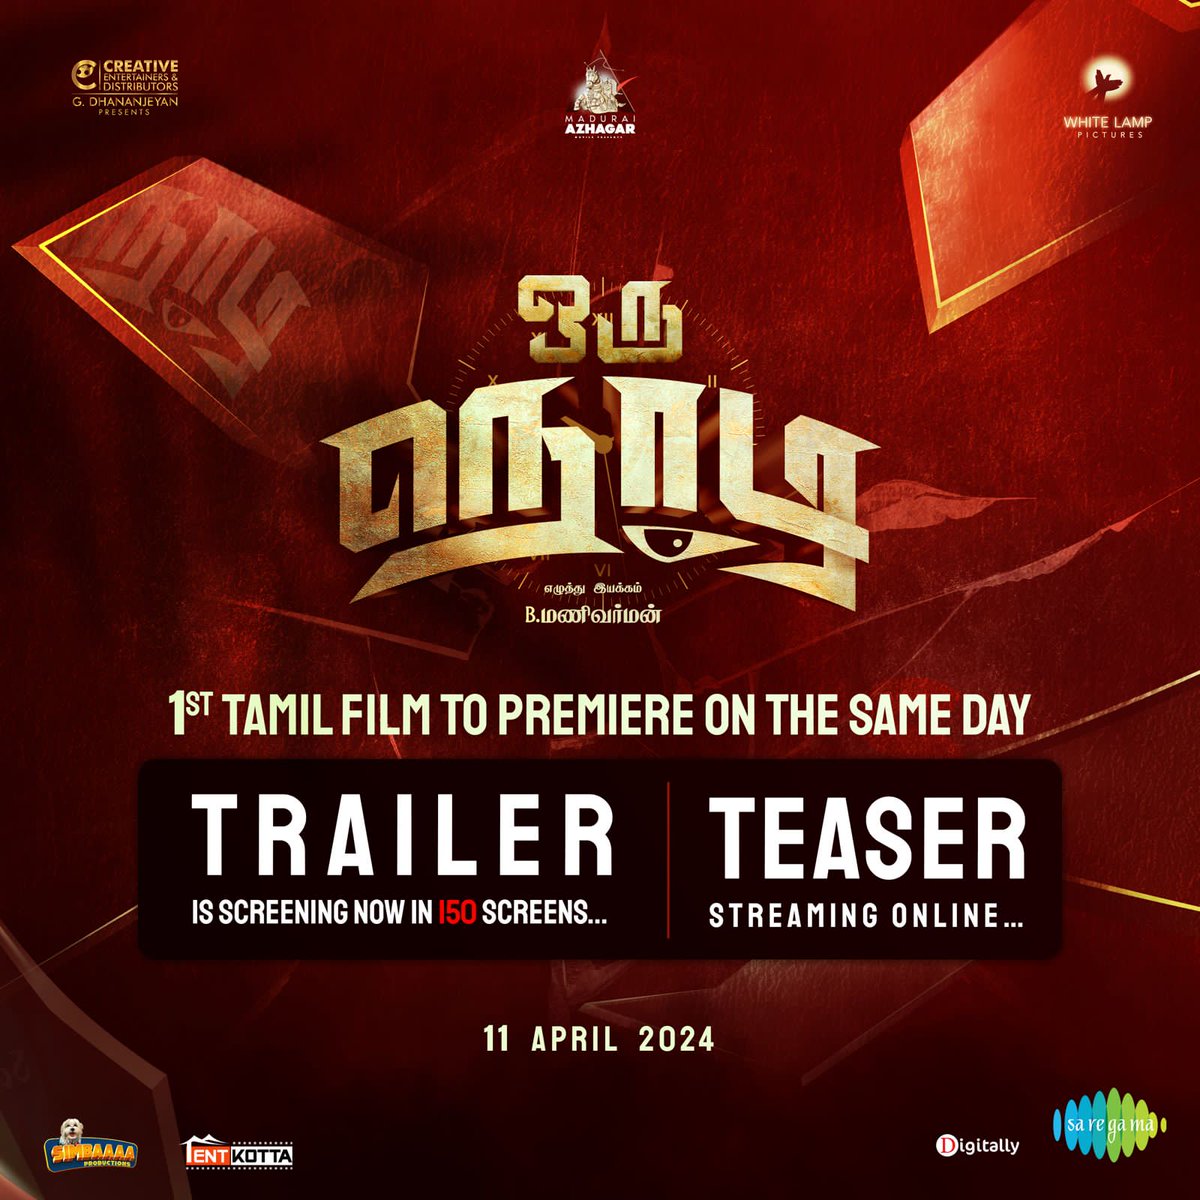 #OruNodi First Tamil Film To Release Teaser & Trailer On The Same Day In Two Mediums👍 #OruNodiTeaser - youtu.be/Z1XyH-vBmiA